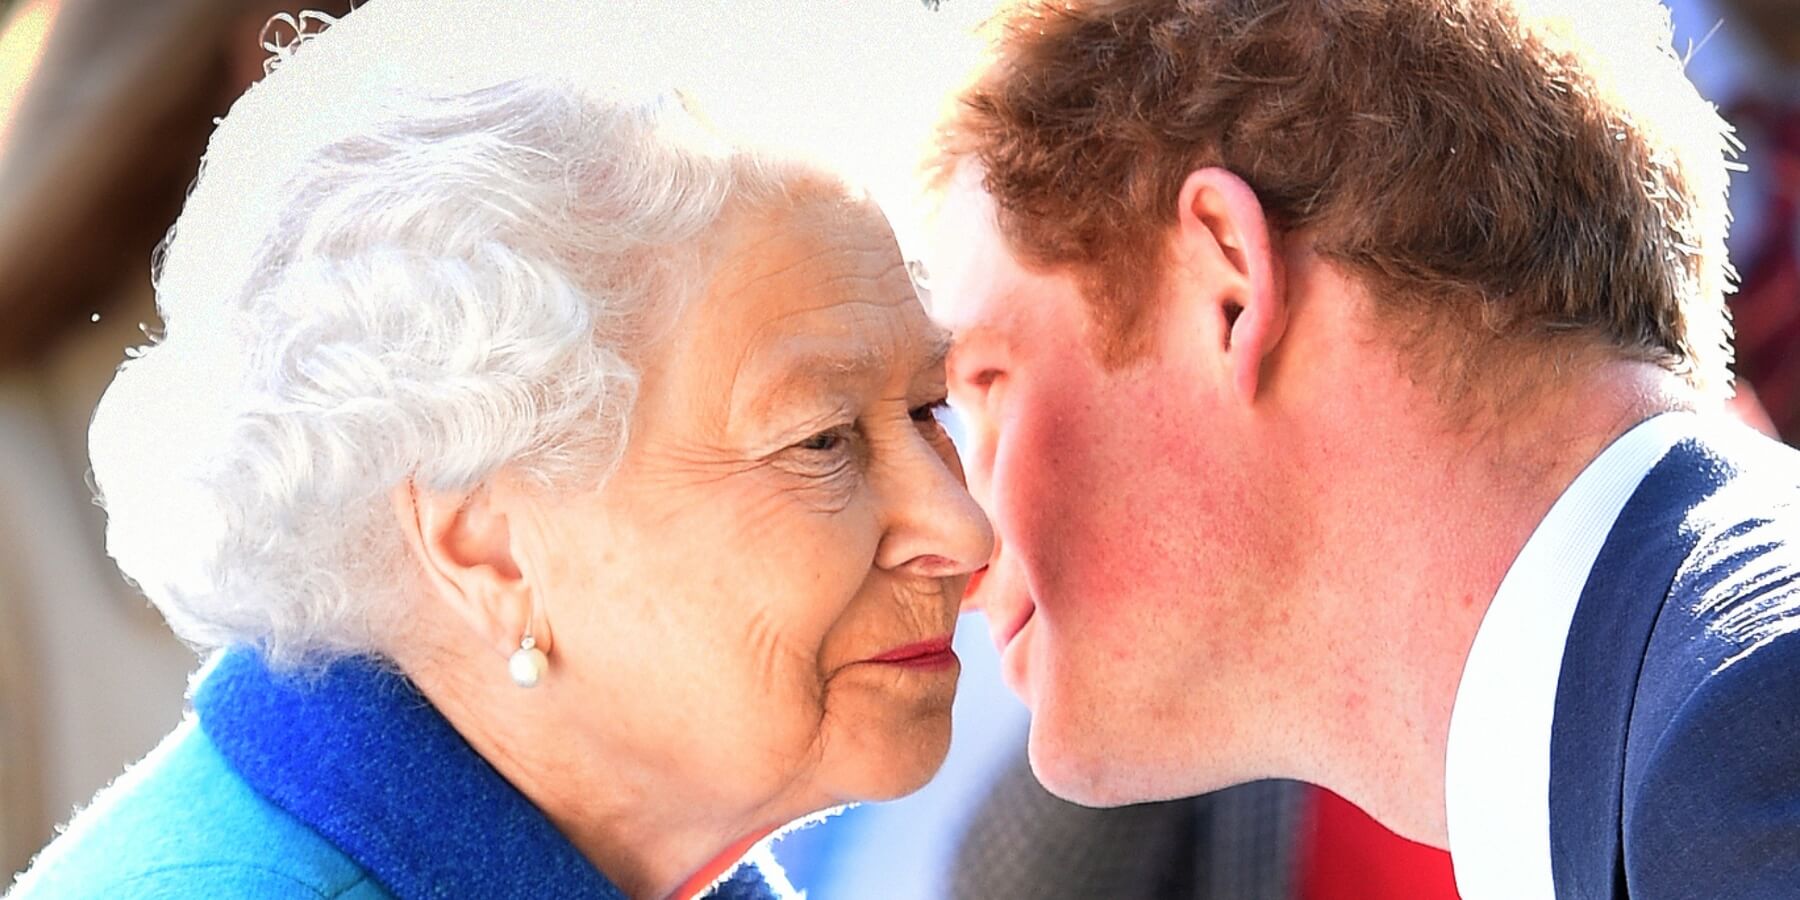 Queen Elizabeth and Prince Harry in a tender moment captured on camera in 2015.